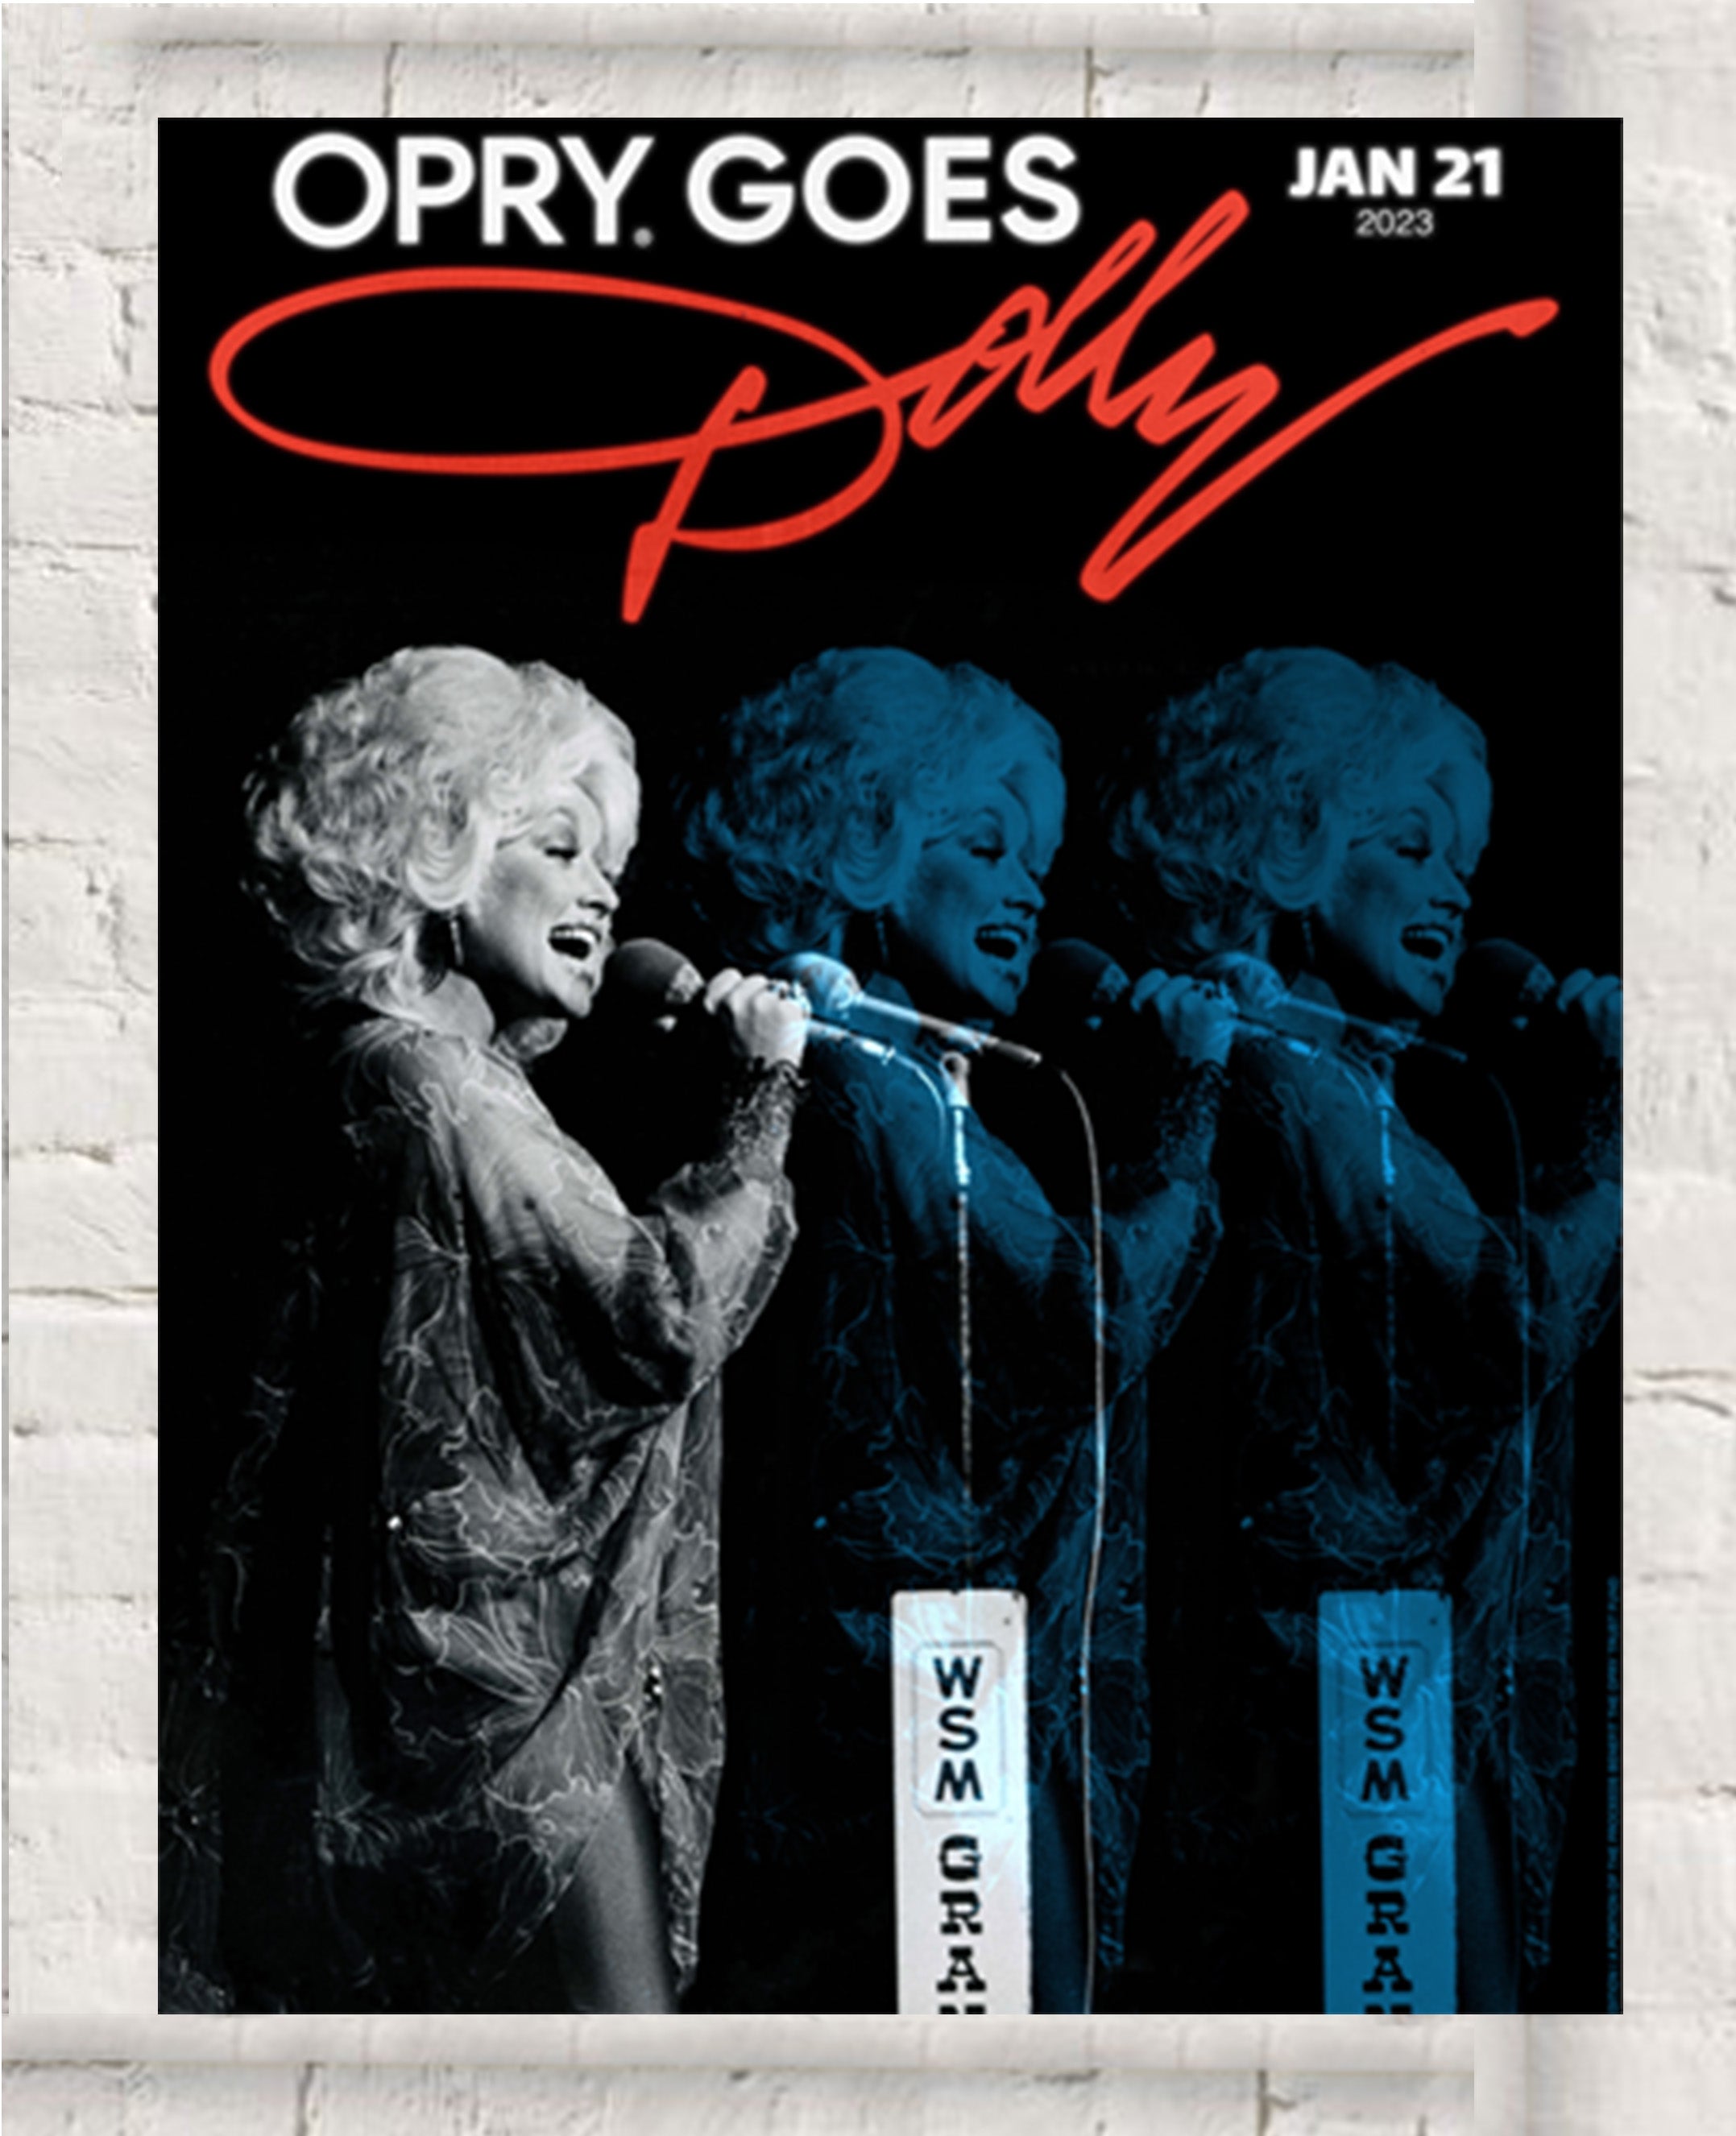 Opry Goes Dolly Exclusive Birthday Event Poster